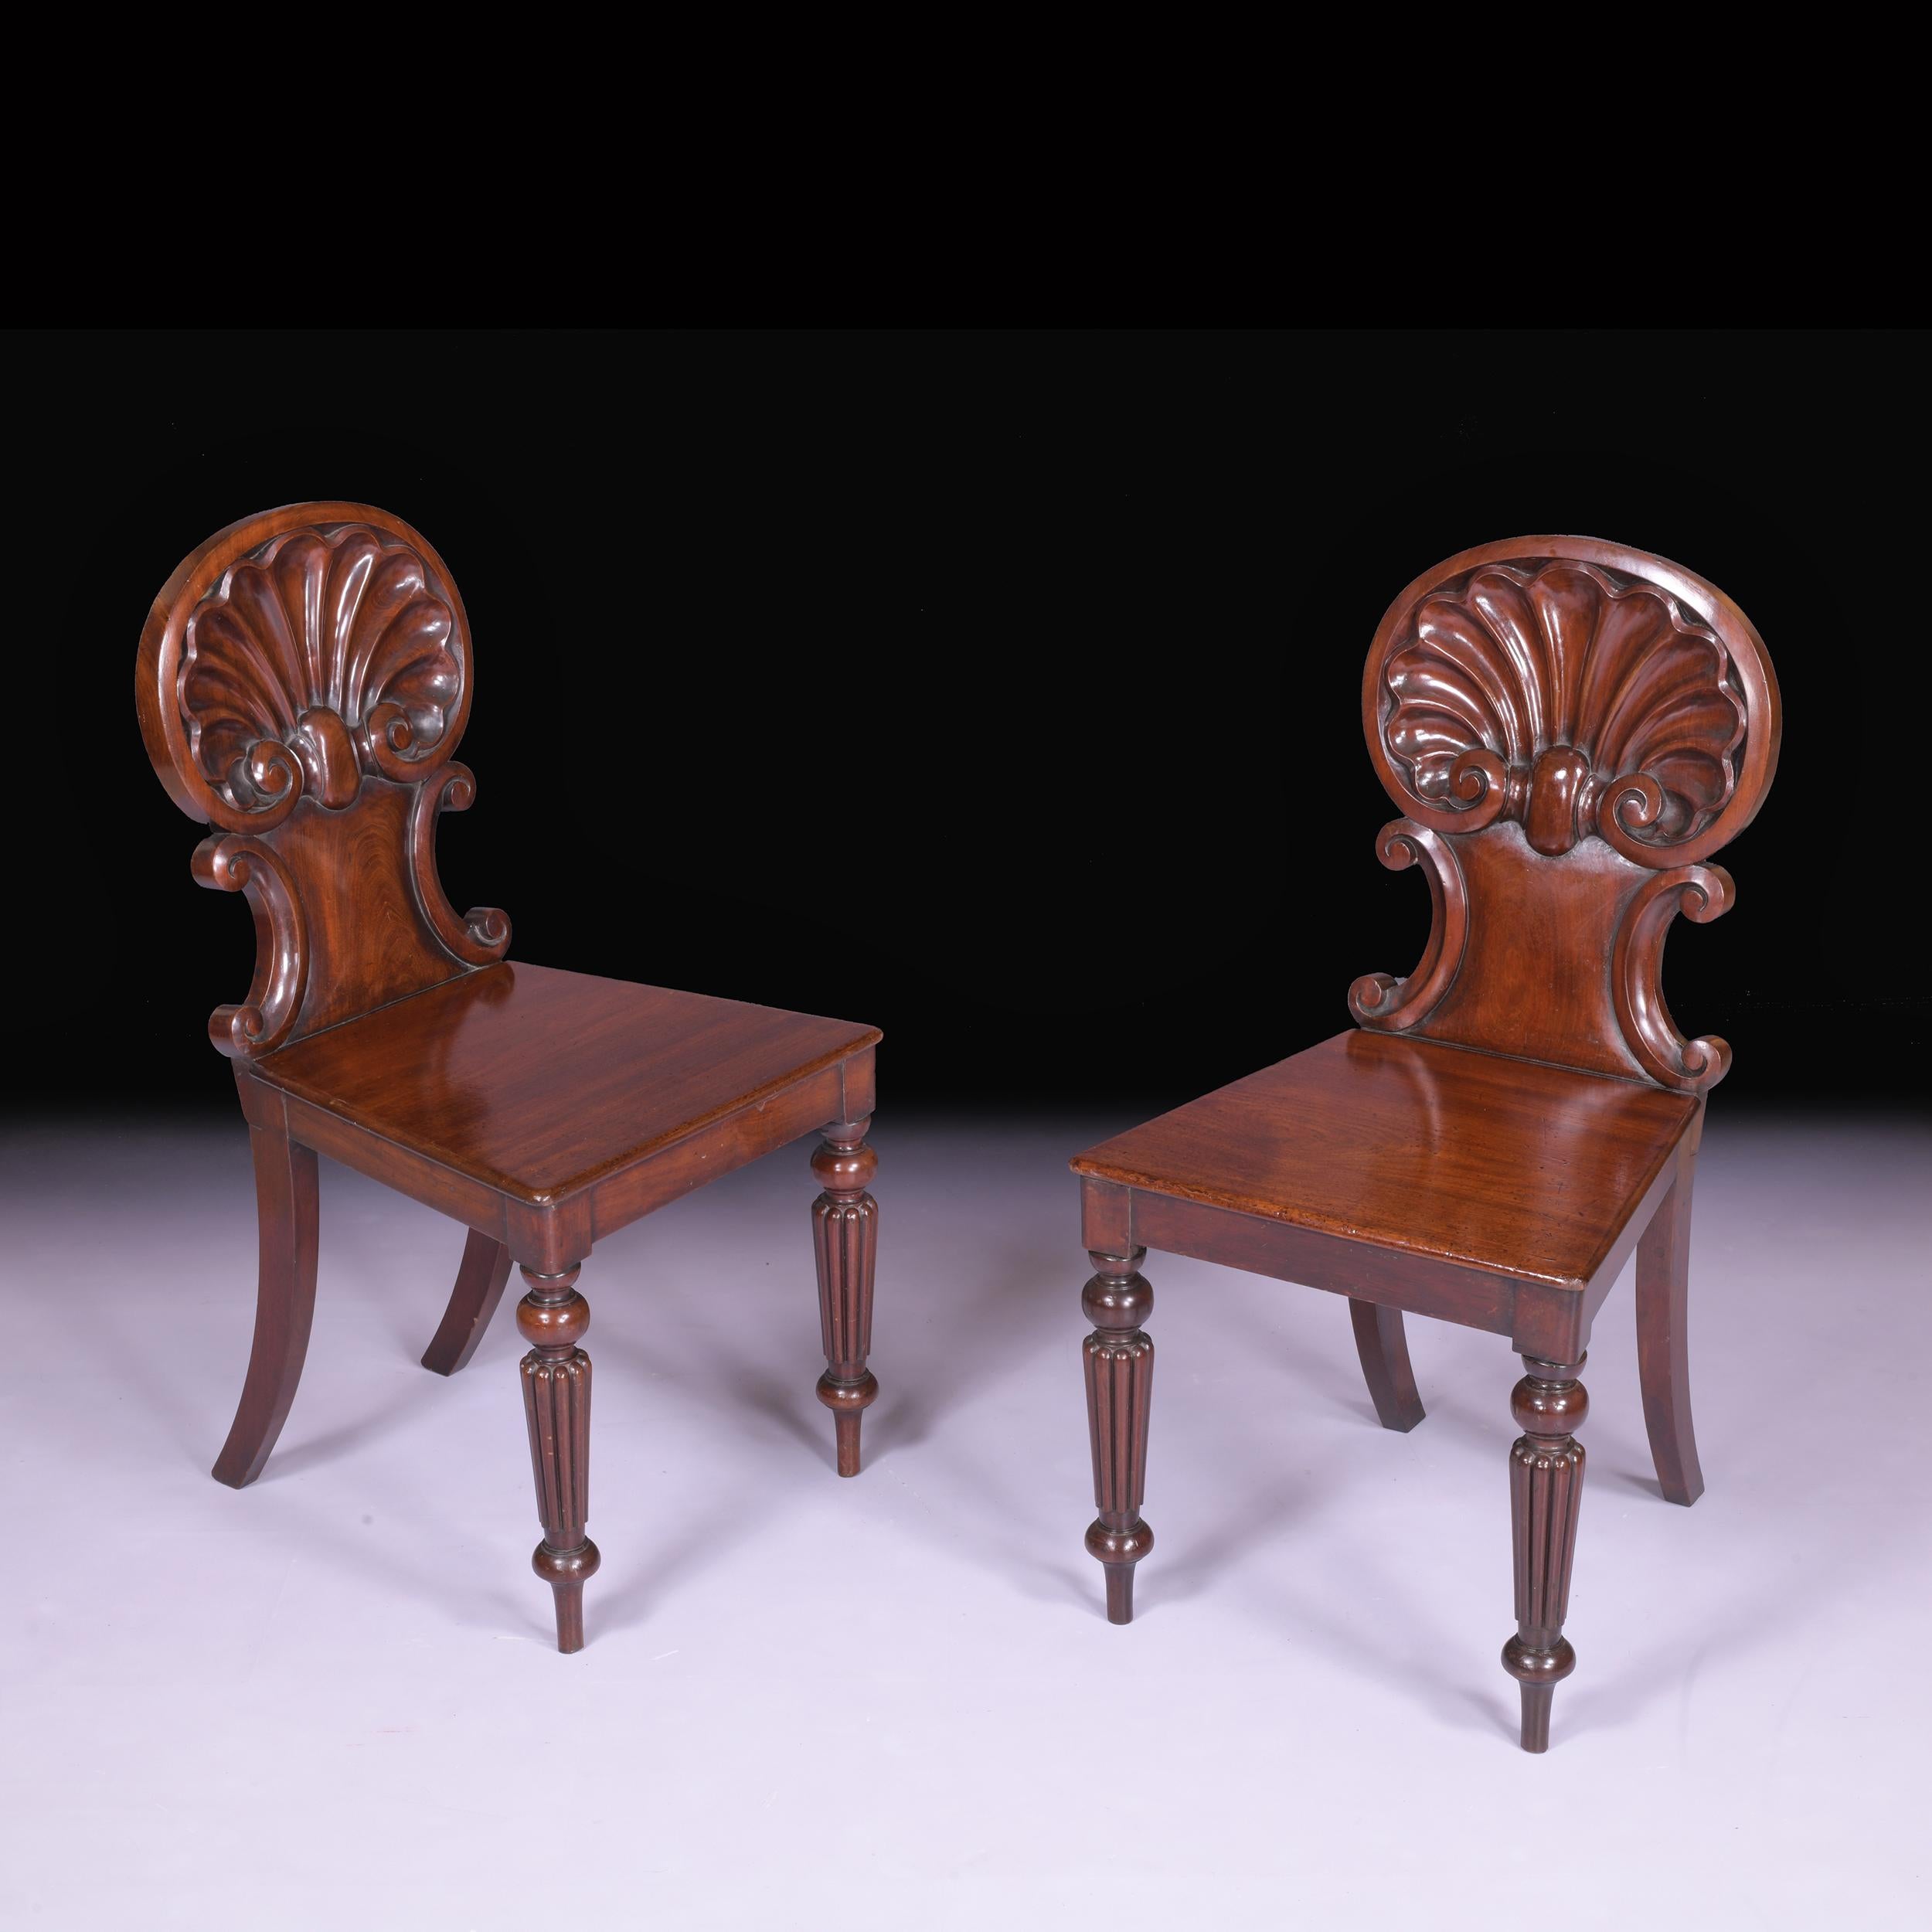 Early Pair of 19th Century English Regency Hall Chairs Attributed to Gillows For Sale 3